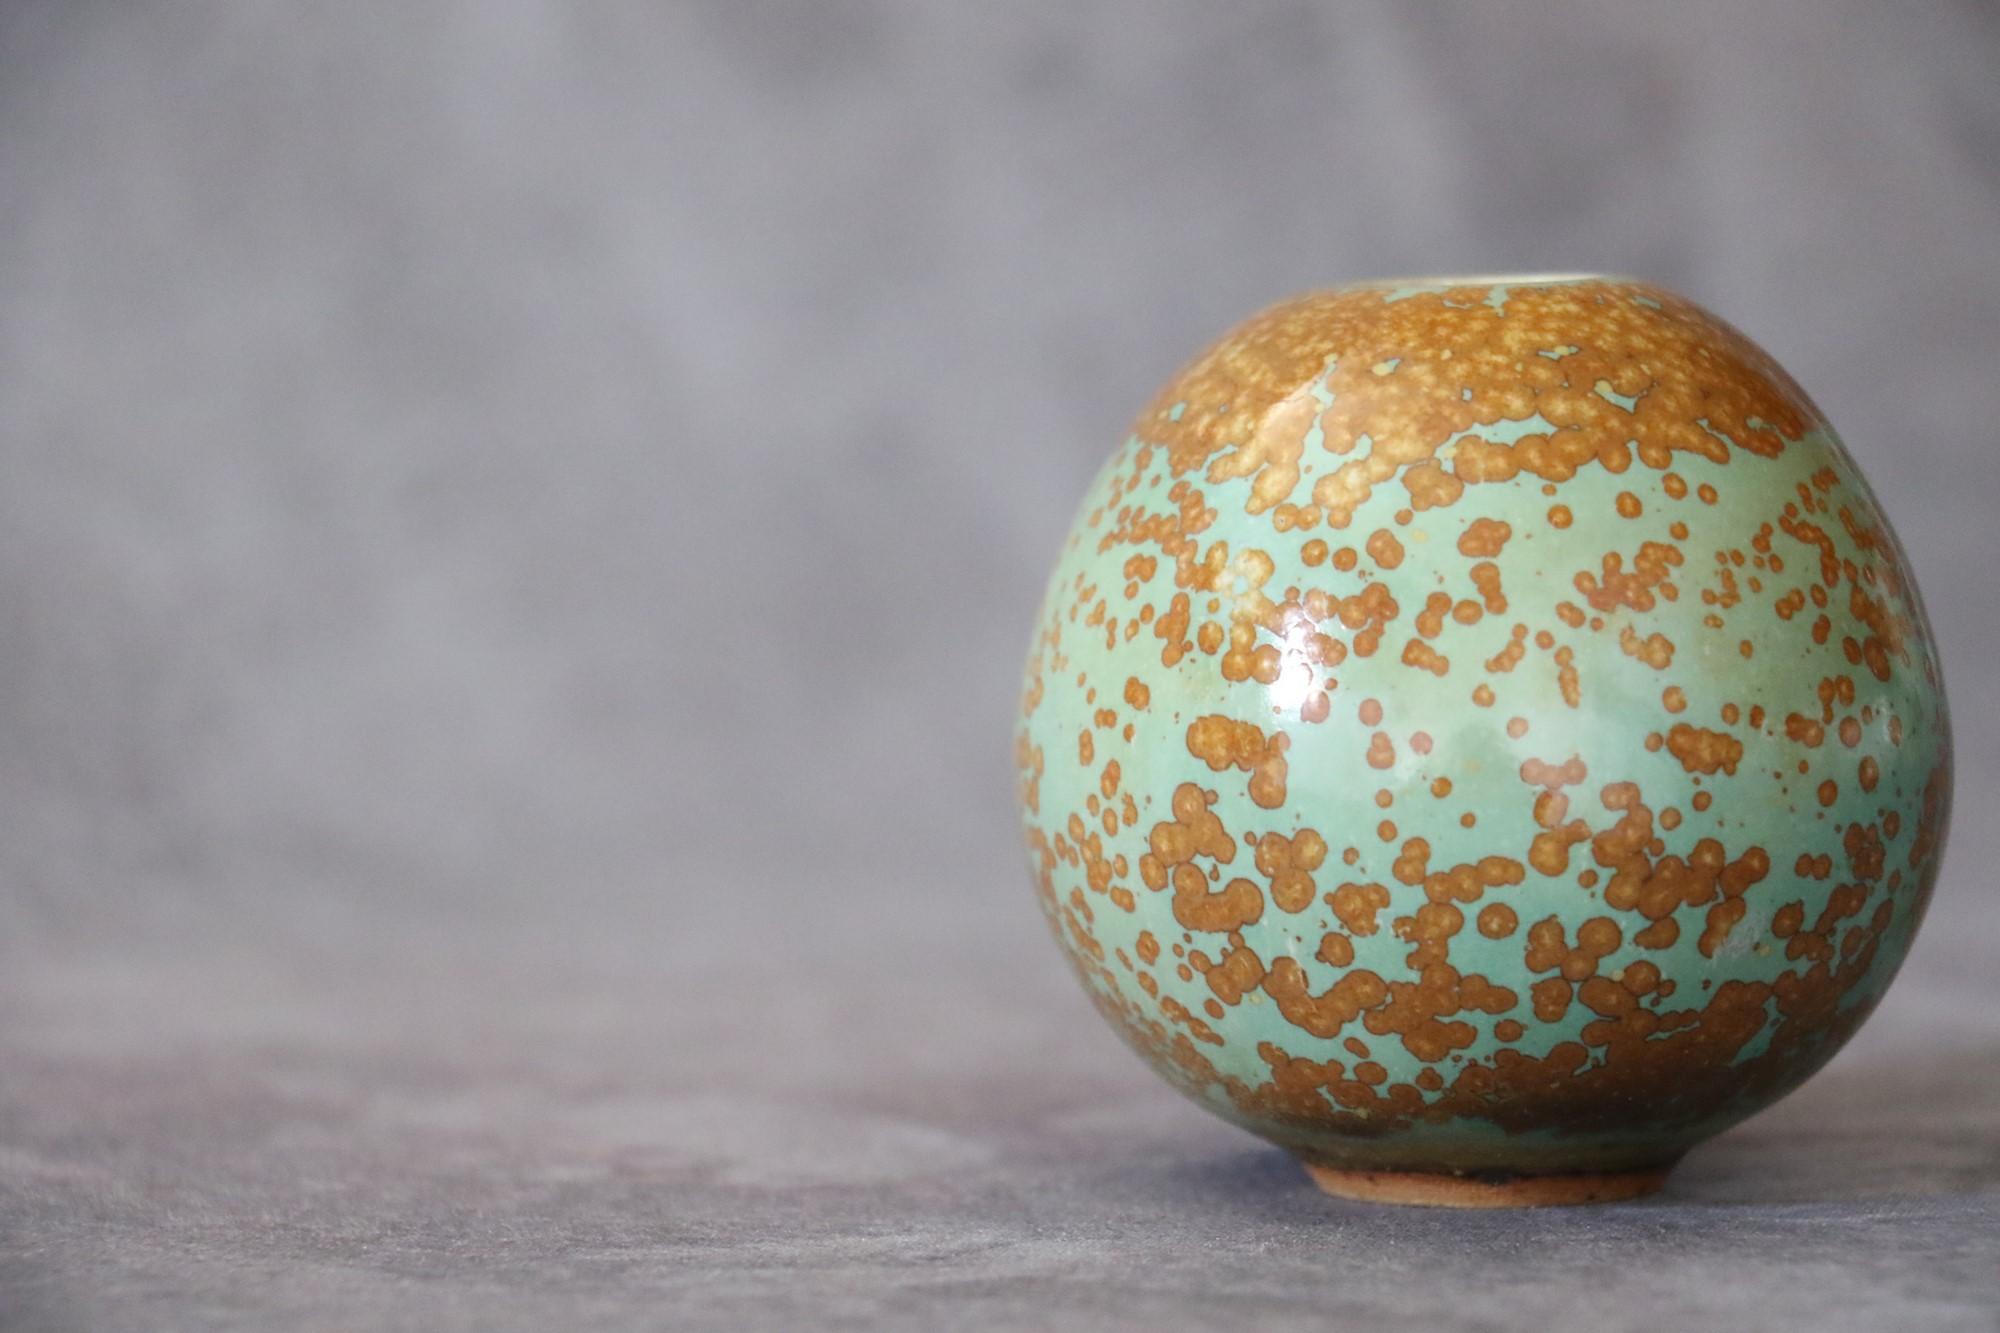 French Ceramic Ball Vase with Nucleations by Monique Cavallini - circa 2000 For Sale 4